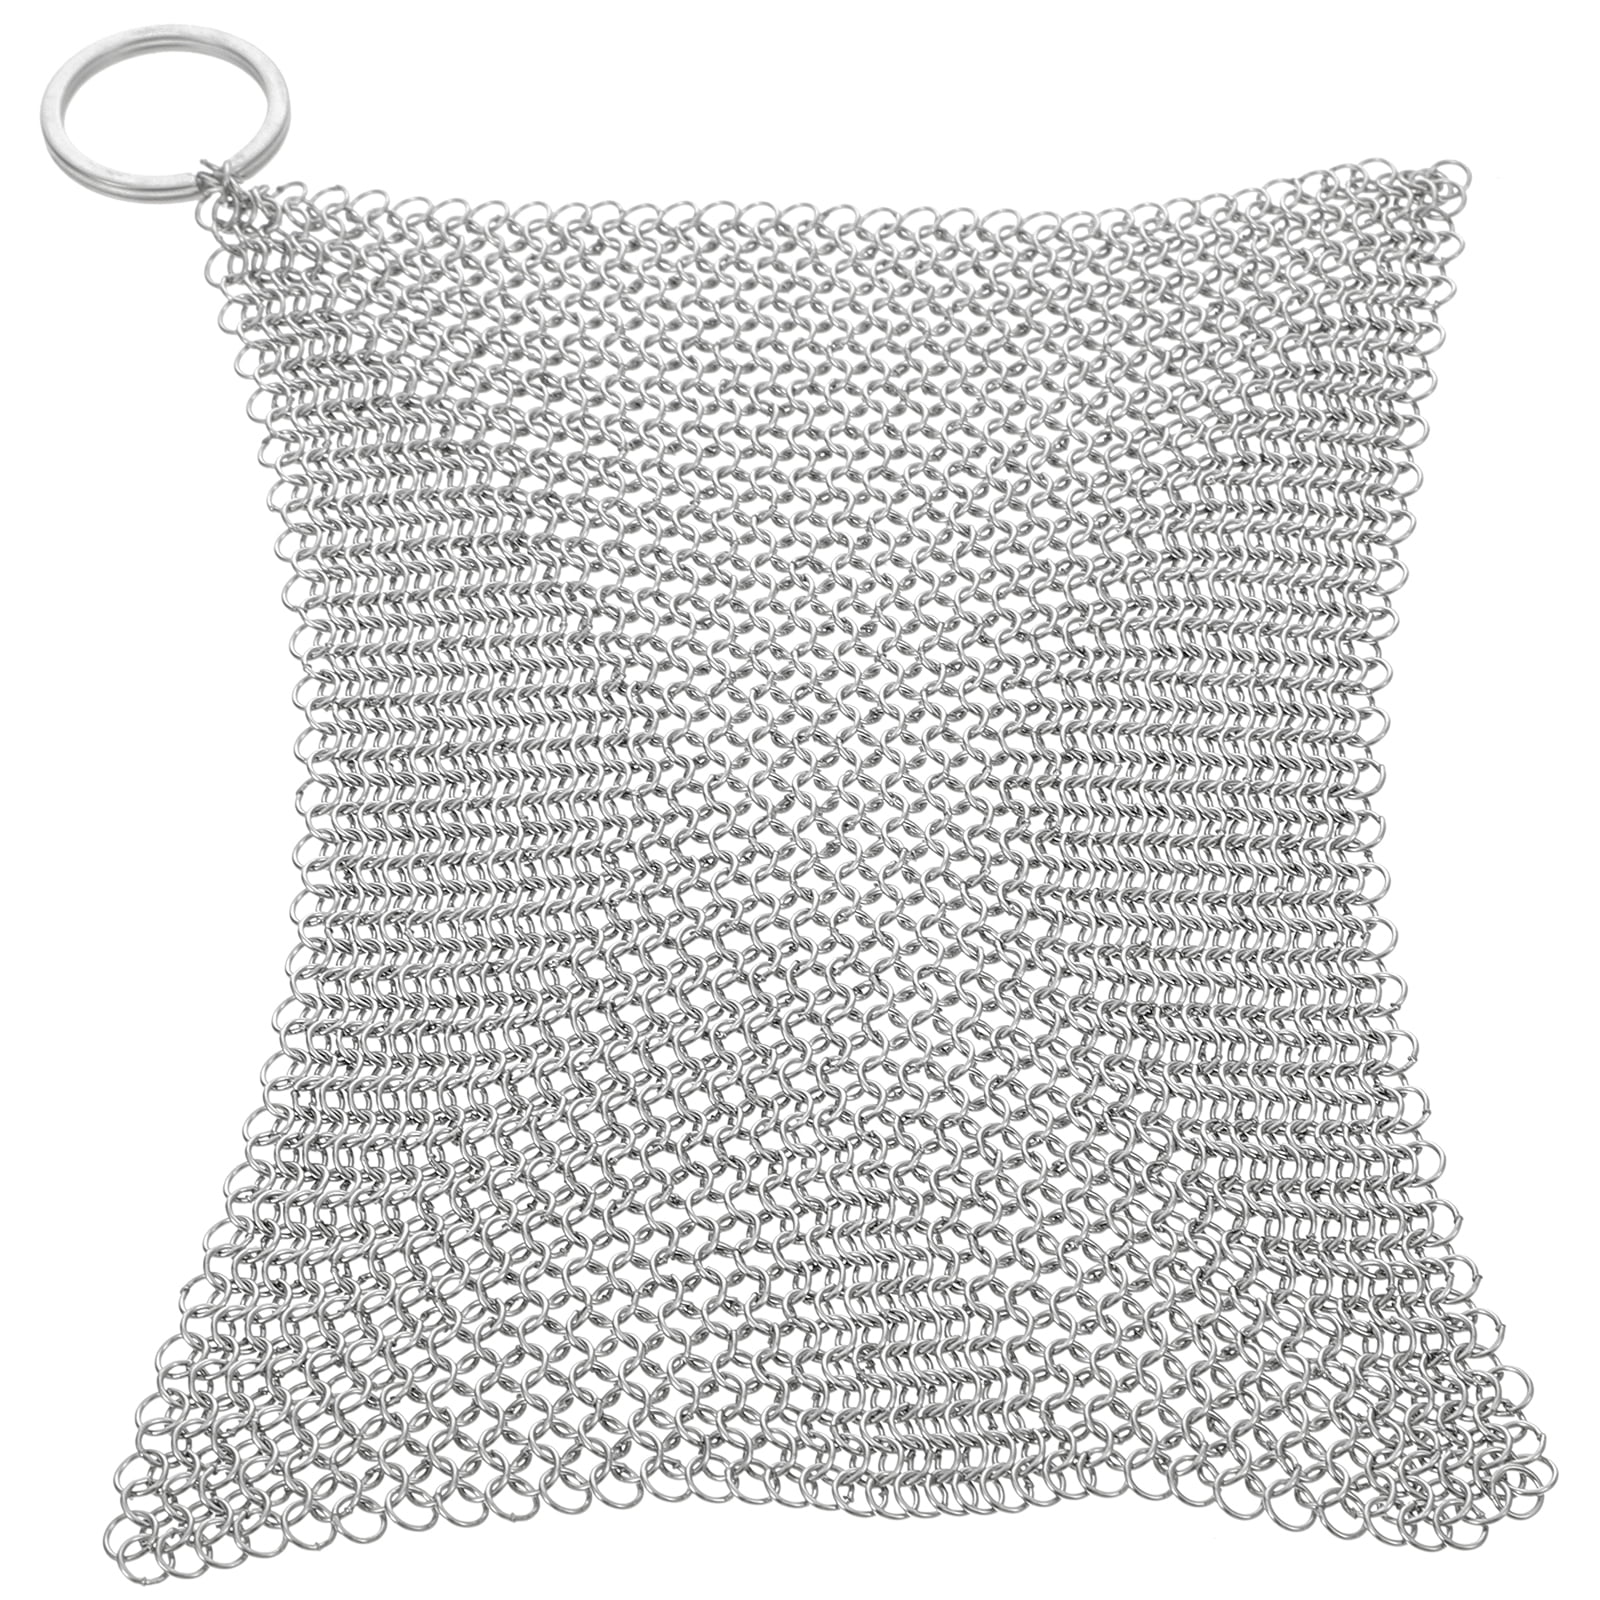 Small Ring Chainmail Scrubber 6IN - New Kitchen Store